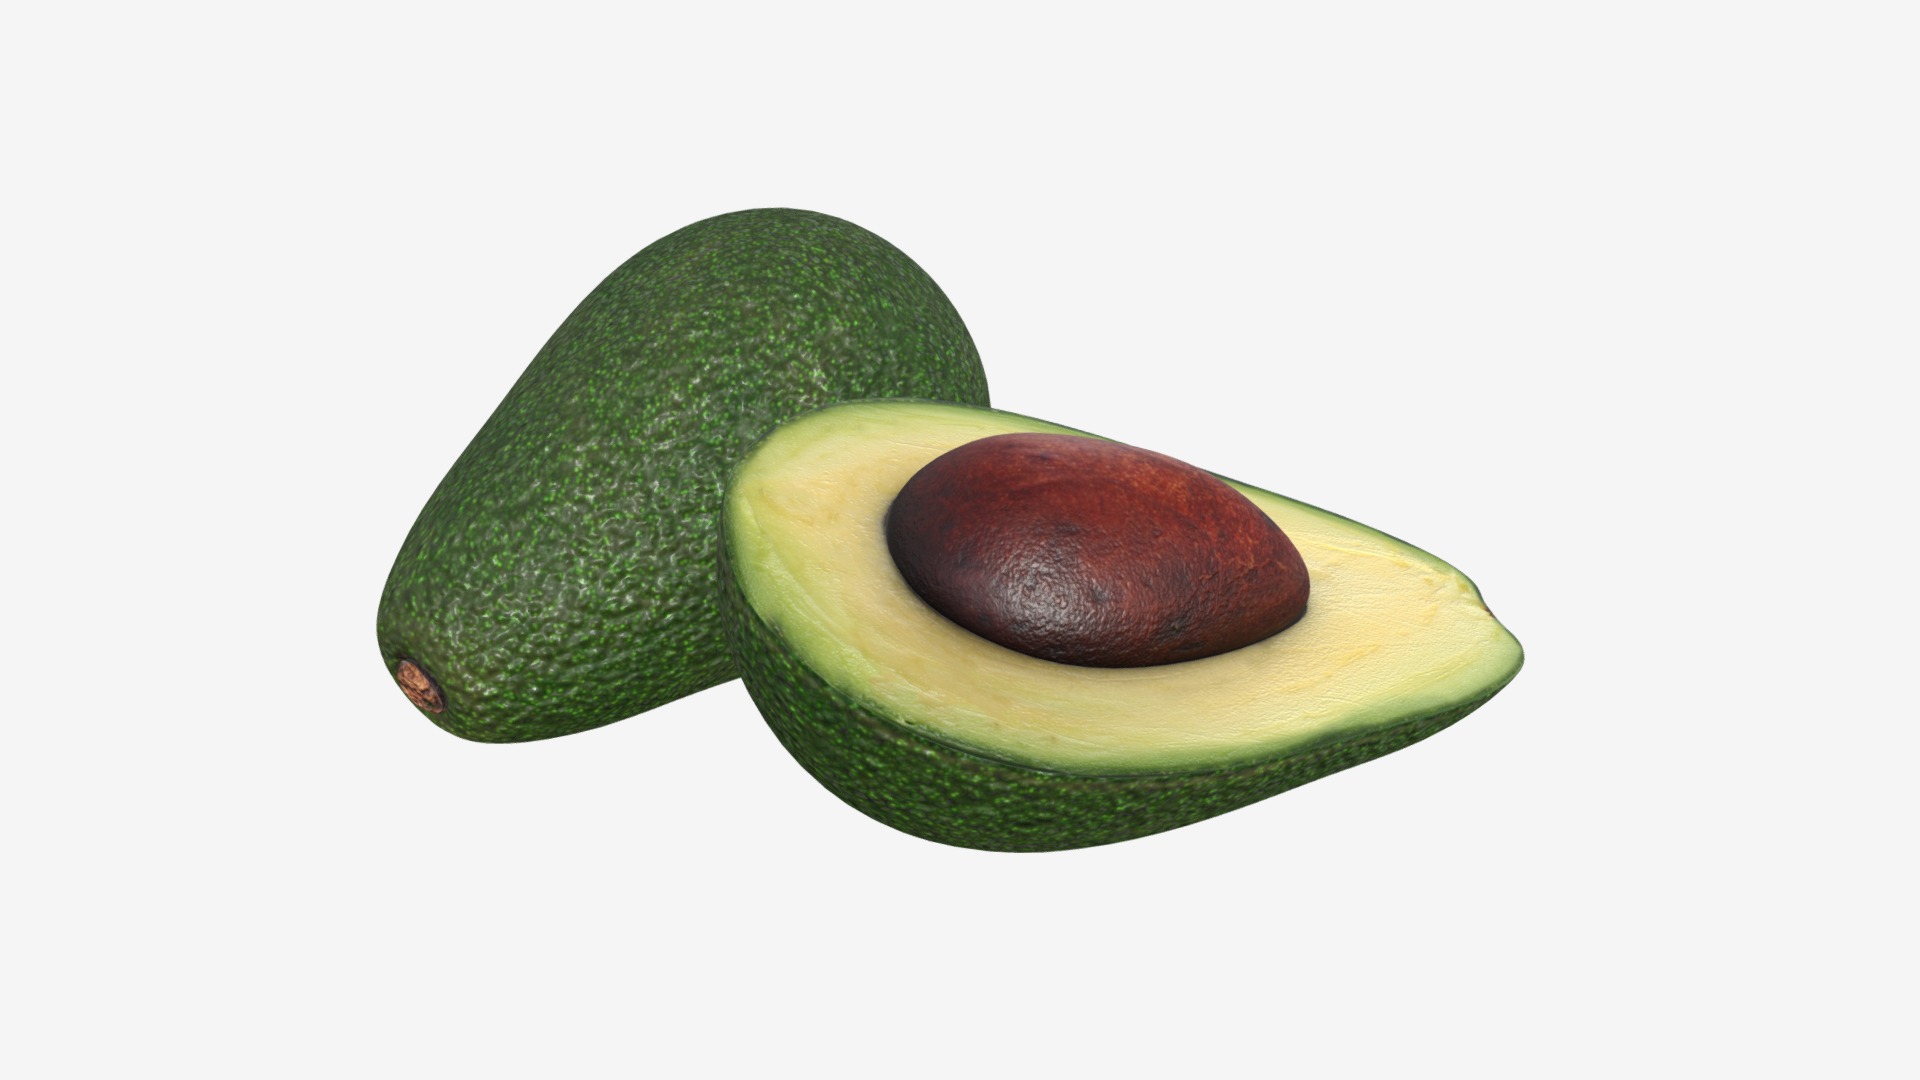 3D model avocado - This is a 3D model of the avocado. The 3D model is about a cucumber and a slice of watermelon.